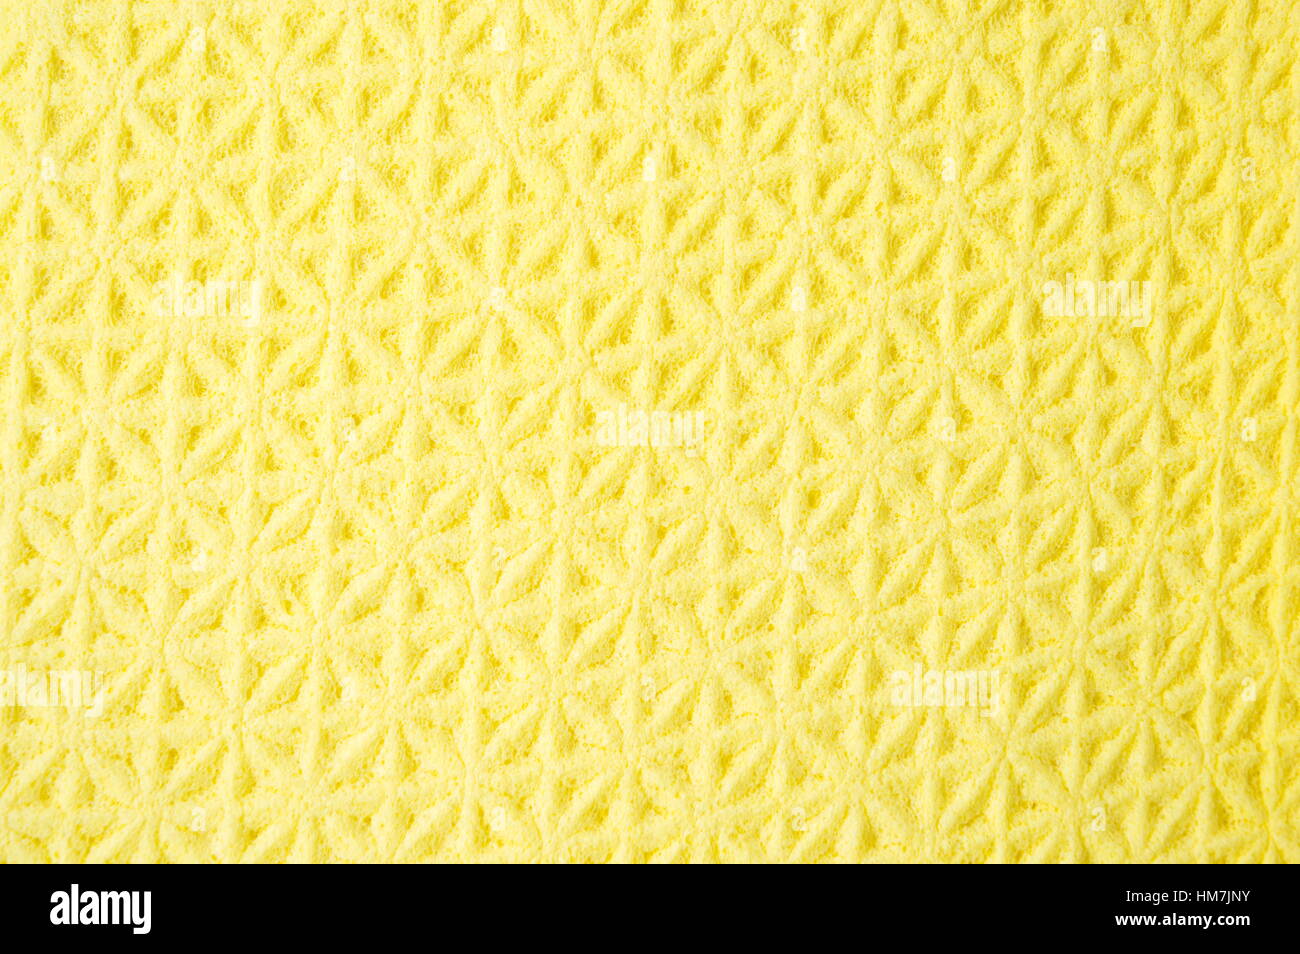 Yellow cleaning cloth background pattern close up Stock Photo